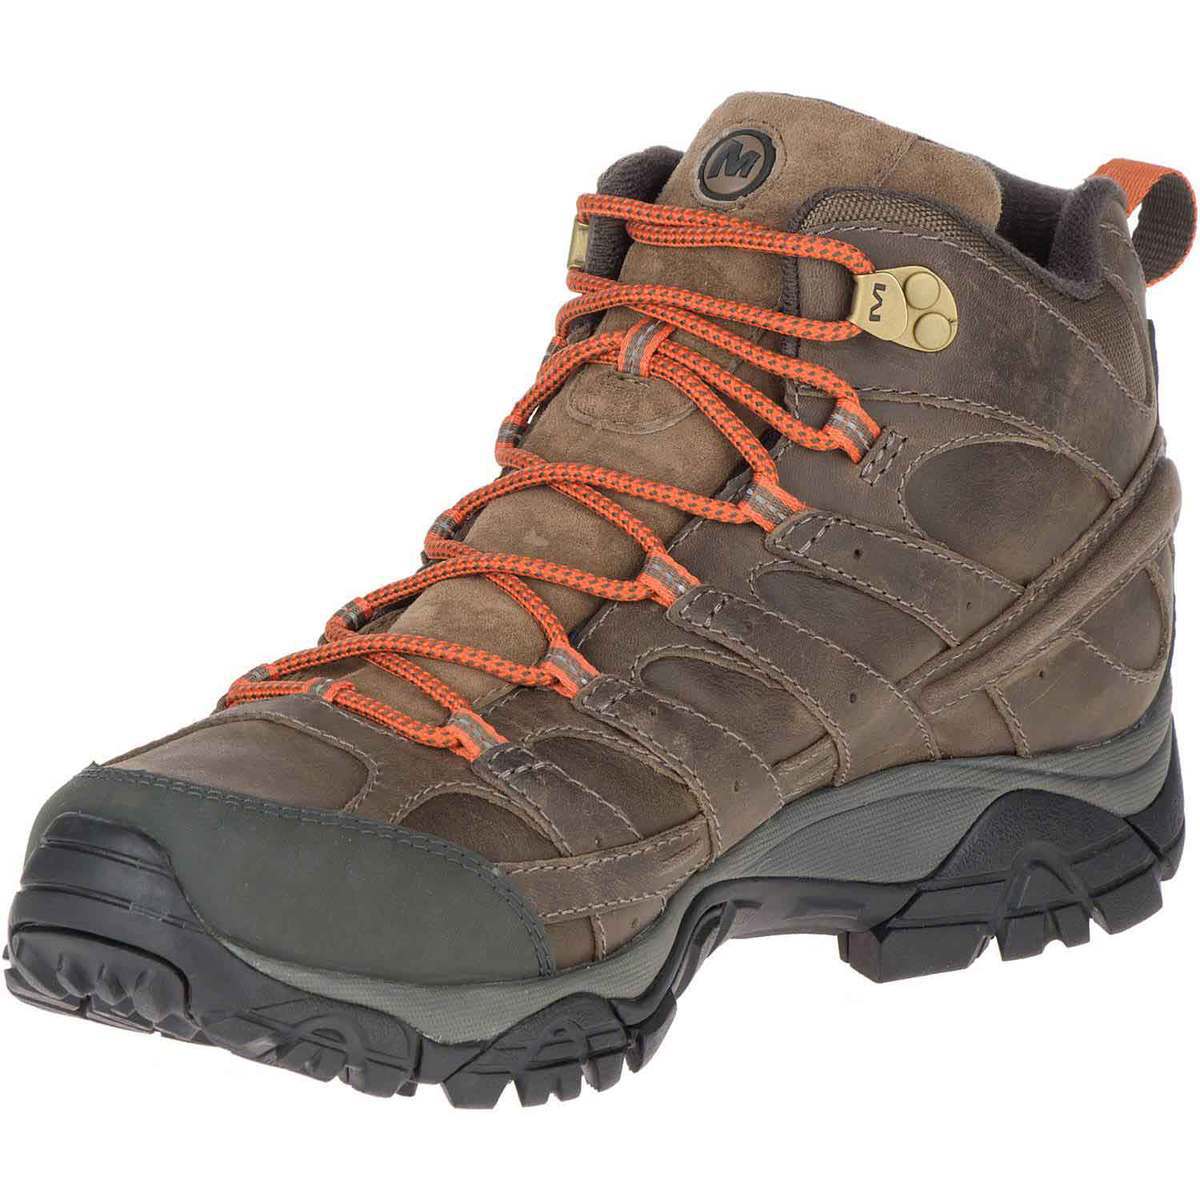 Merrell Men's Moab 2 Prime Waterproof Mid Hiking Boots - Canteen - Size ...